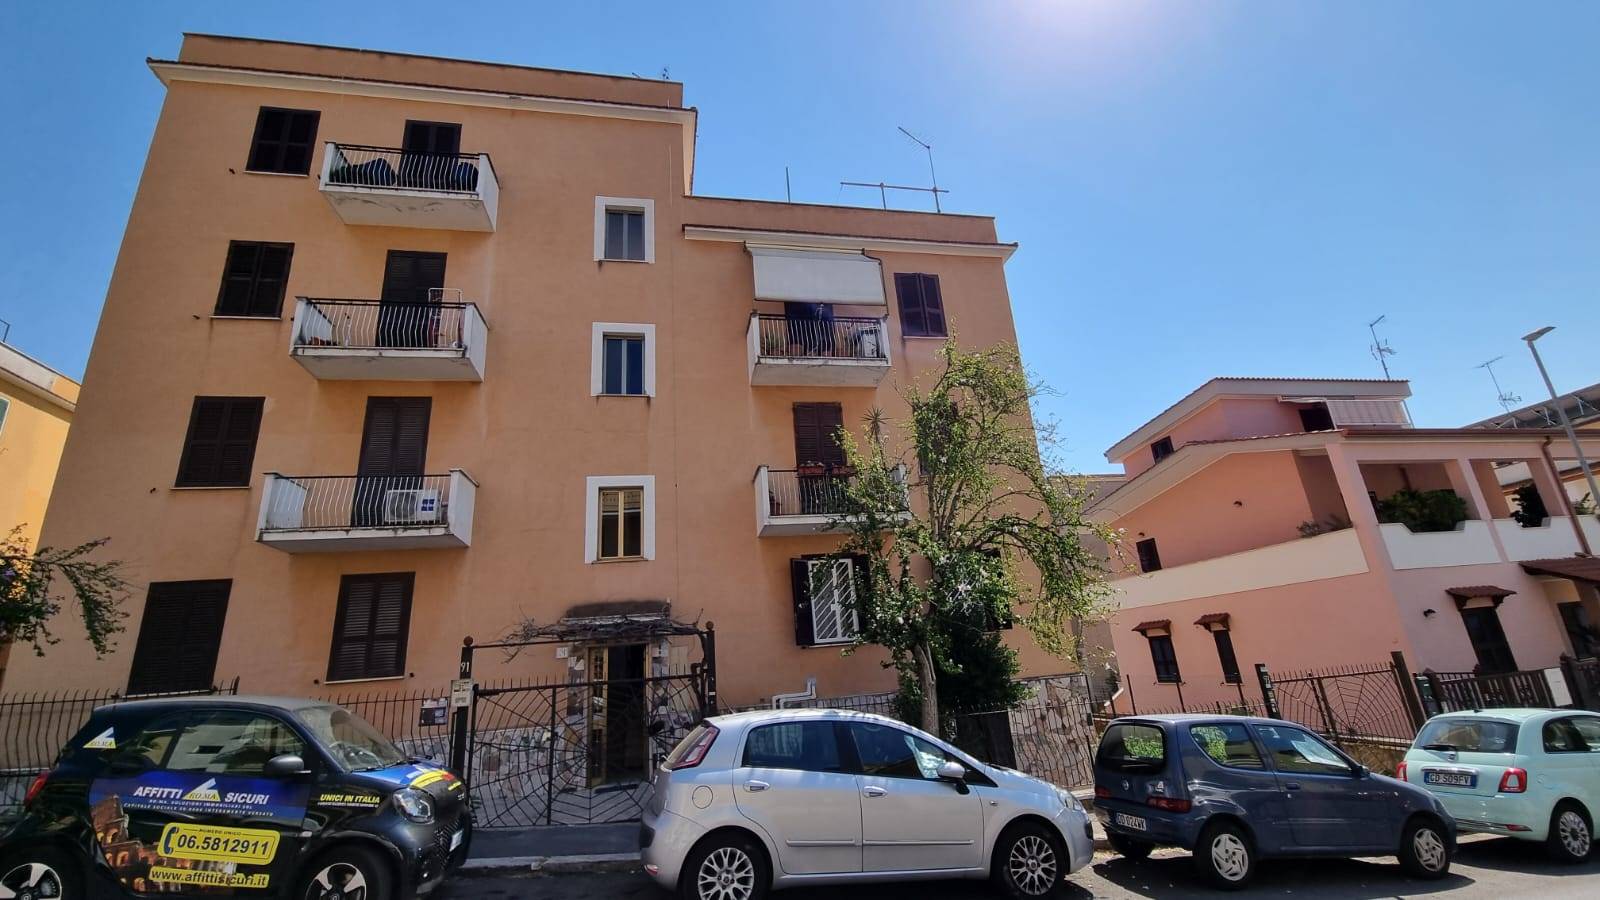 TALENTI, ROMA, Apartment for rent of 75 Sq. mt., Good condition, Heating Individual heating system, Energetic class: G, Epi: 175 kwh/m2 year, placed 